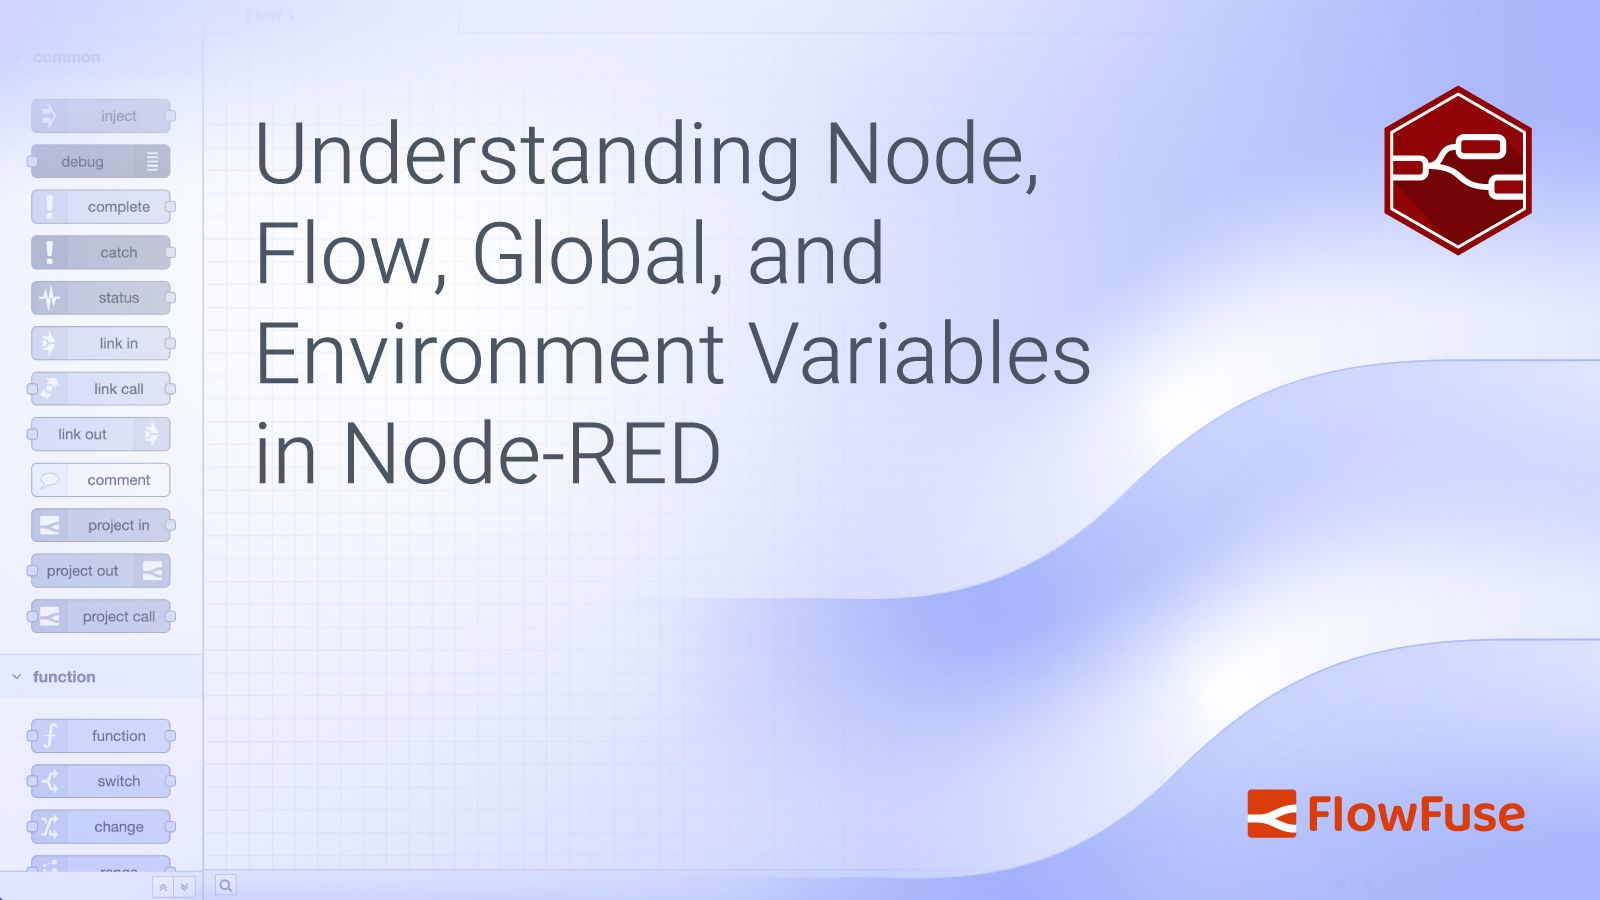 Image representing Understanding Node, Flow, Global, and Environment Variables in Node-RED